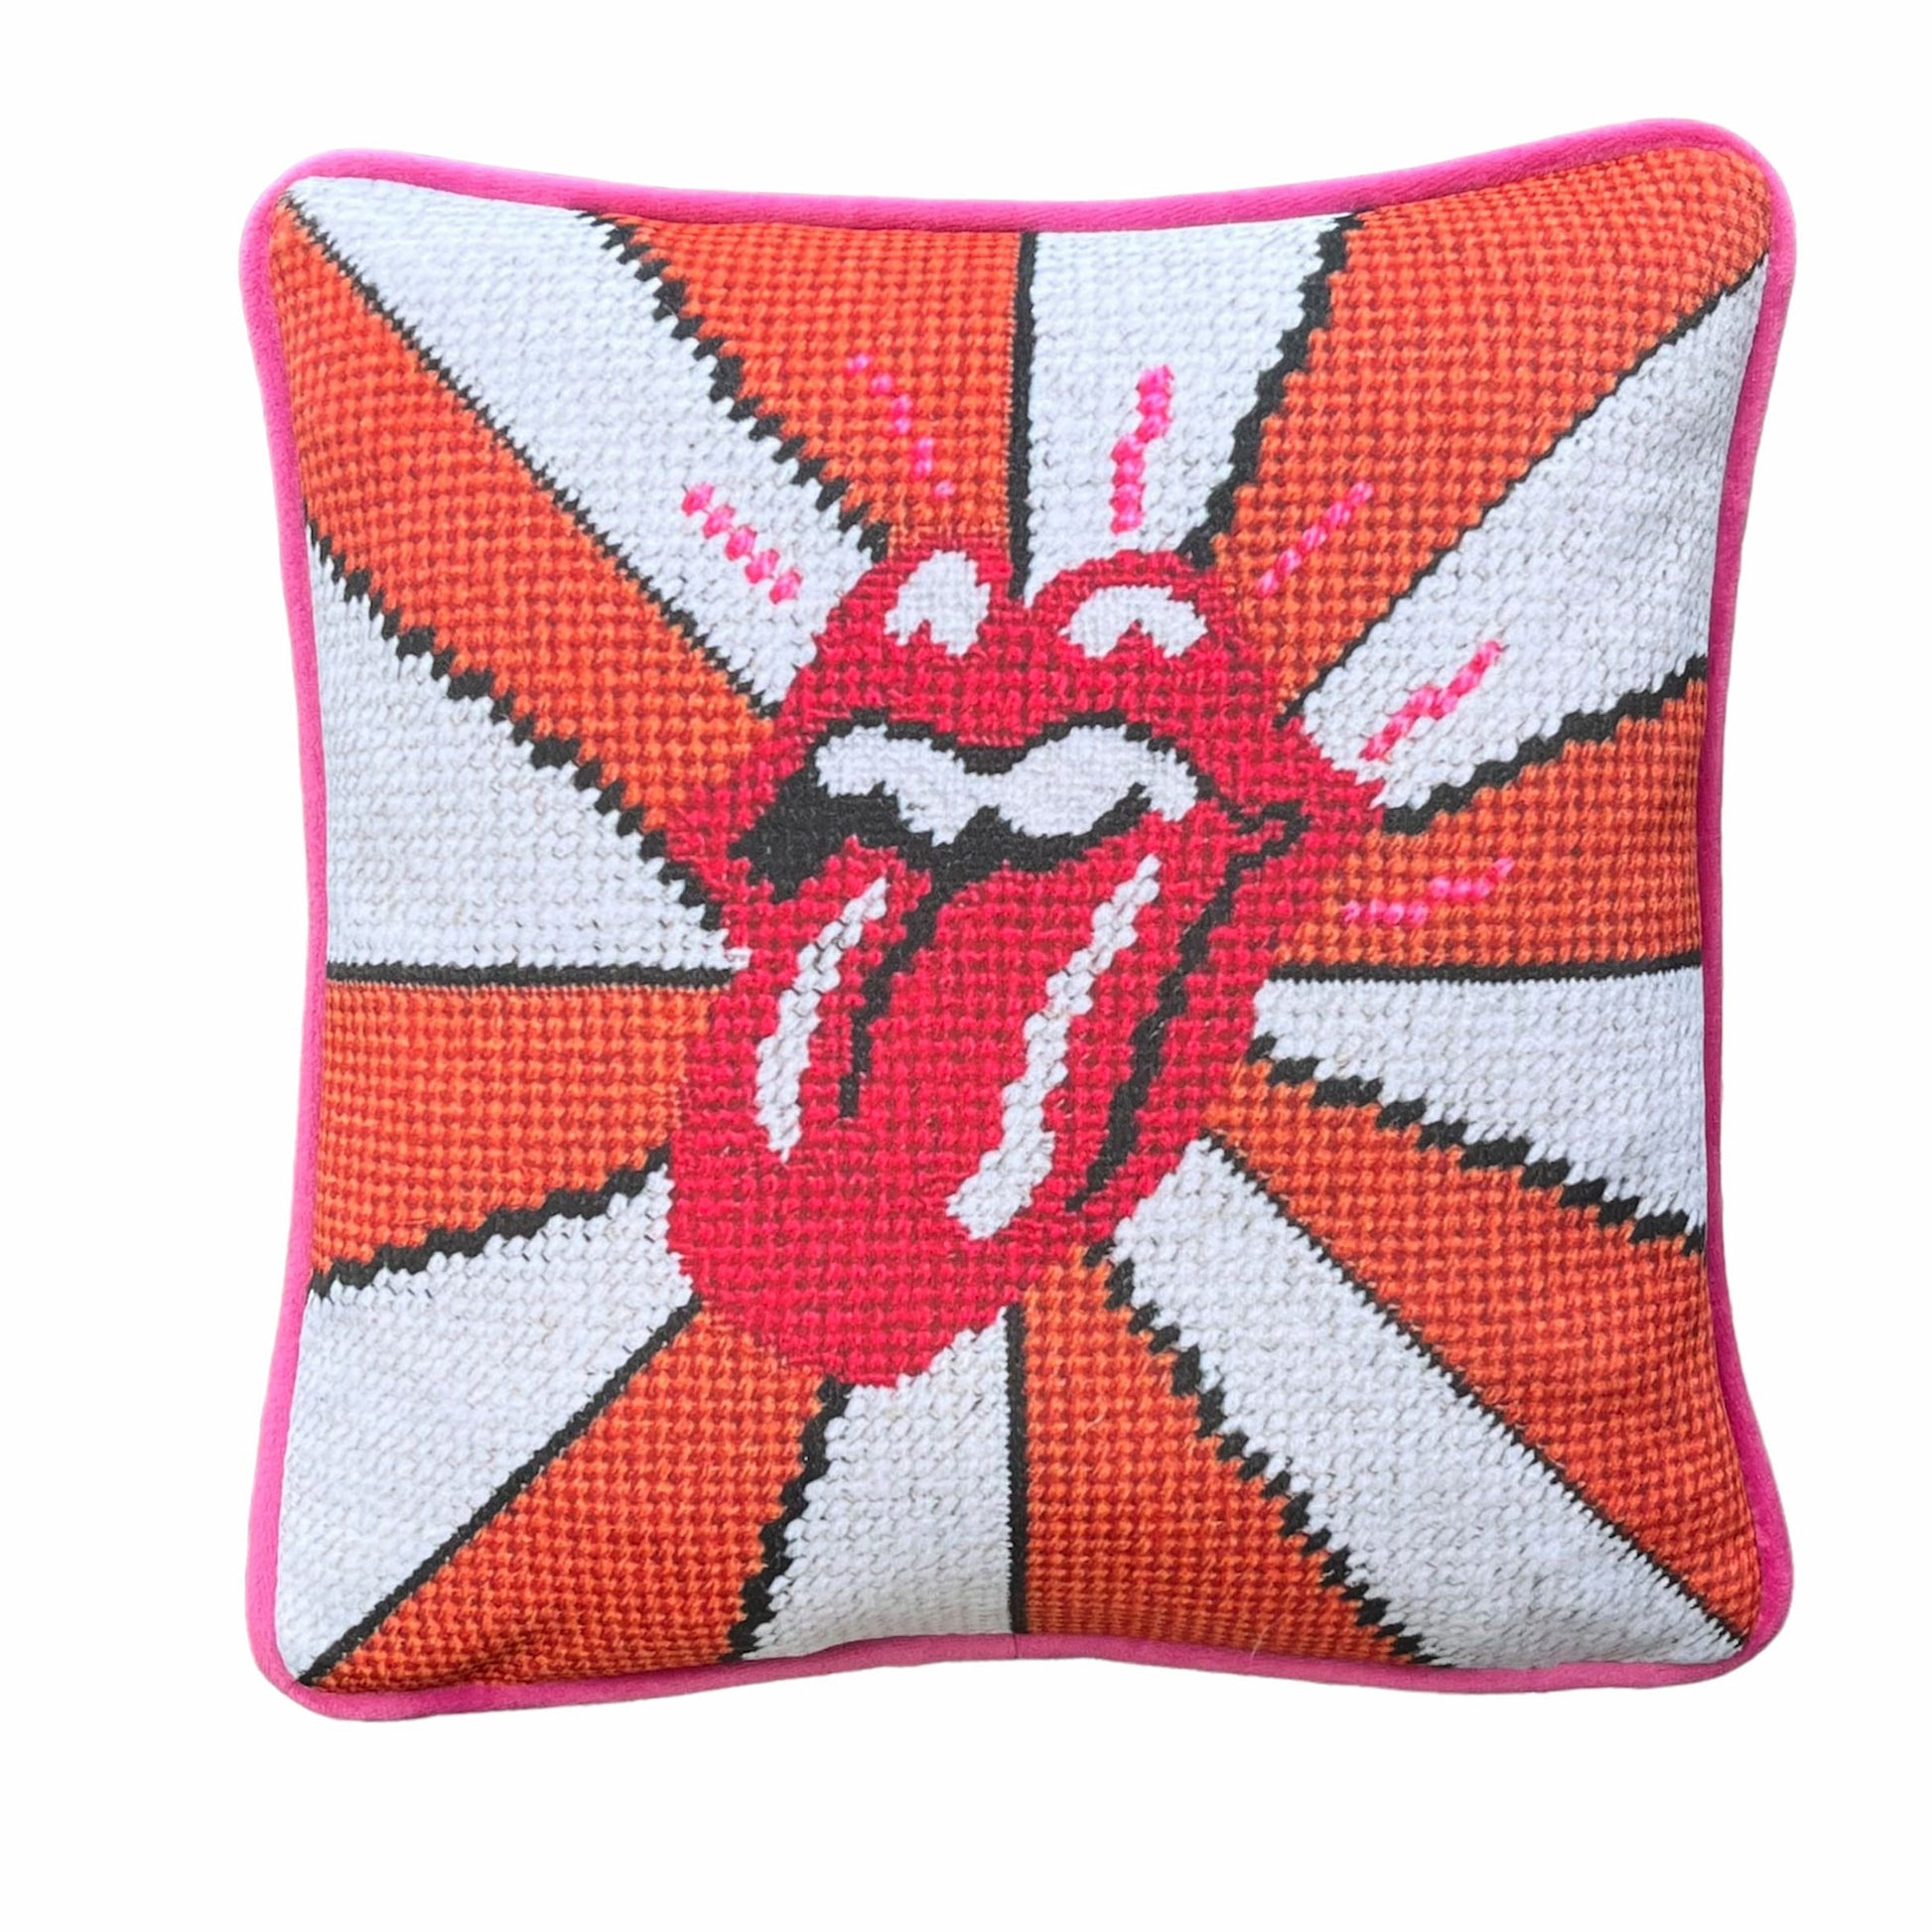 iconic rolling stones tongue with carousel gold and white bands, hot pink highlights